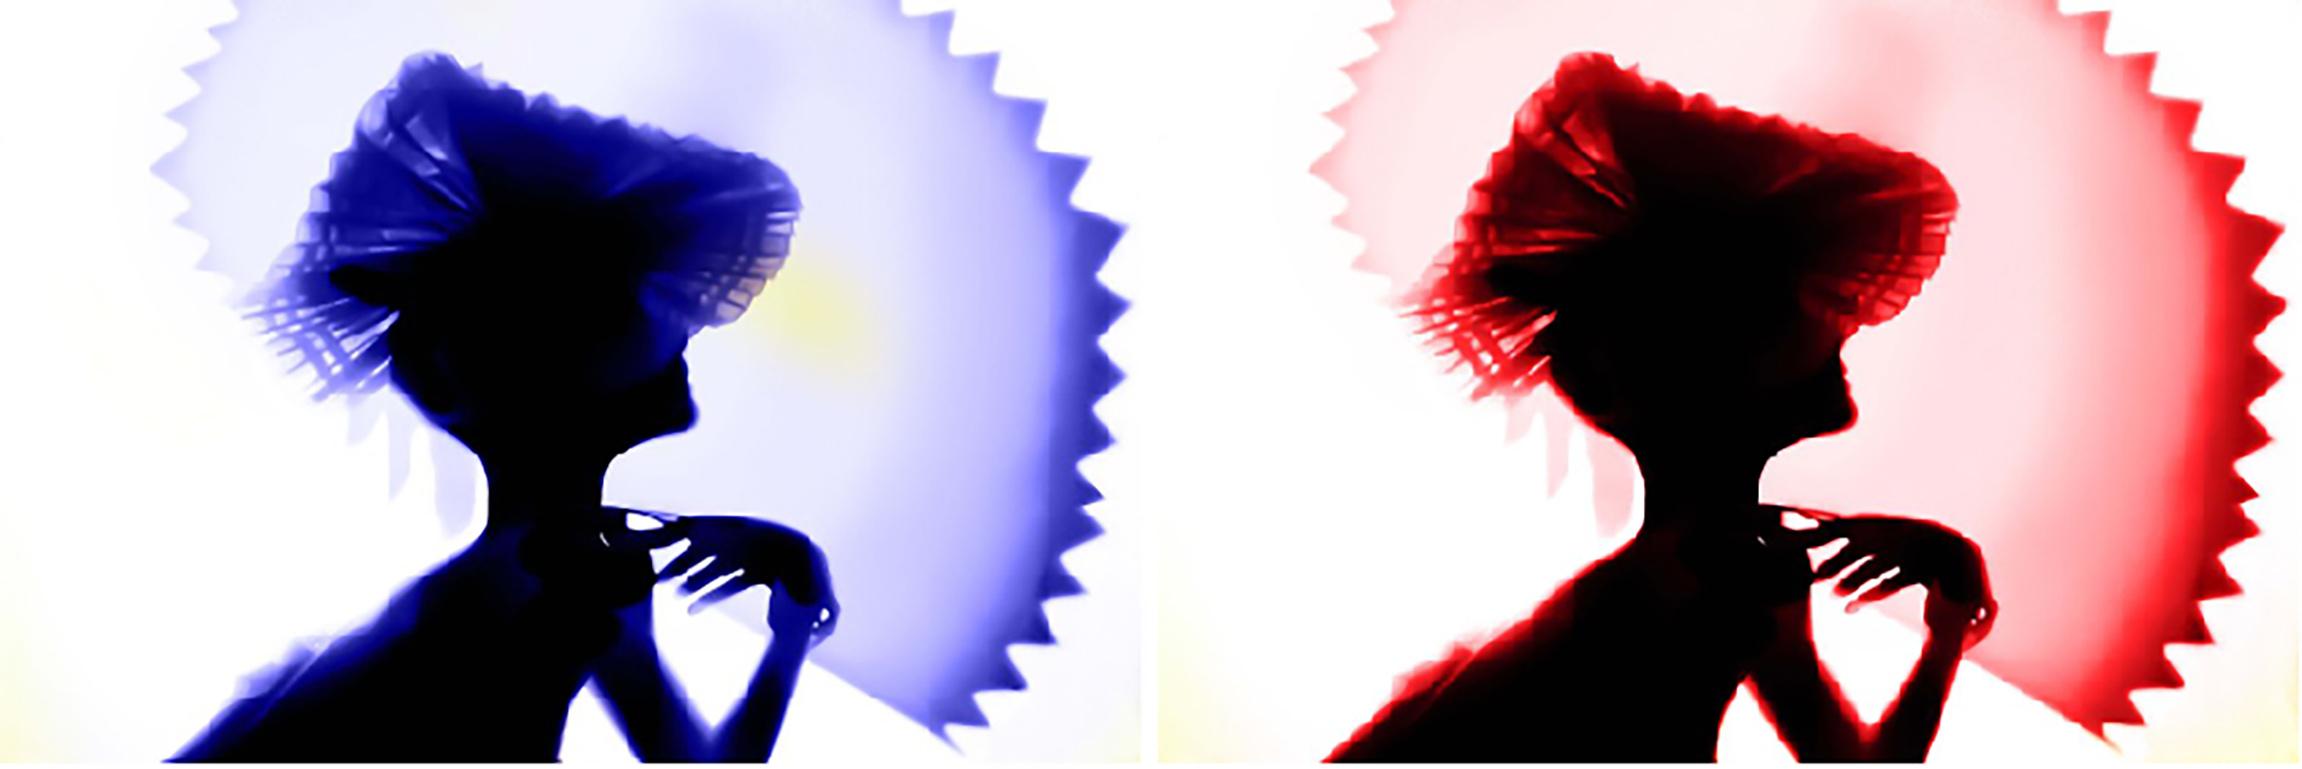 Dora Franco Abstract Photograph - Back Lighting, Blue Red Diptych. 